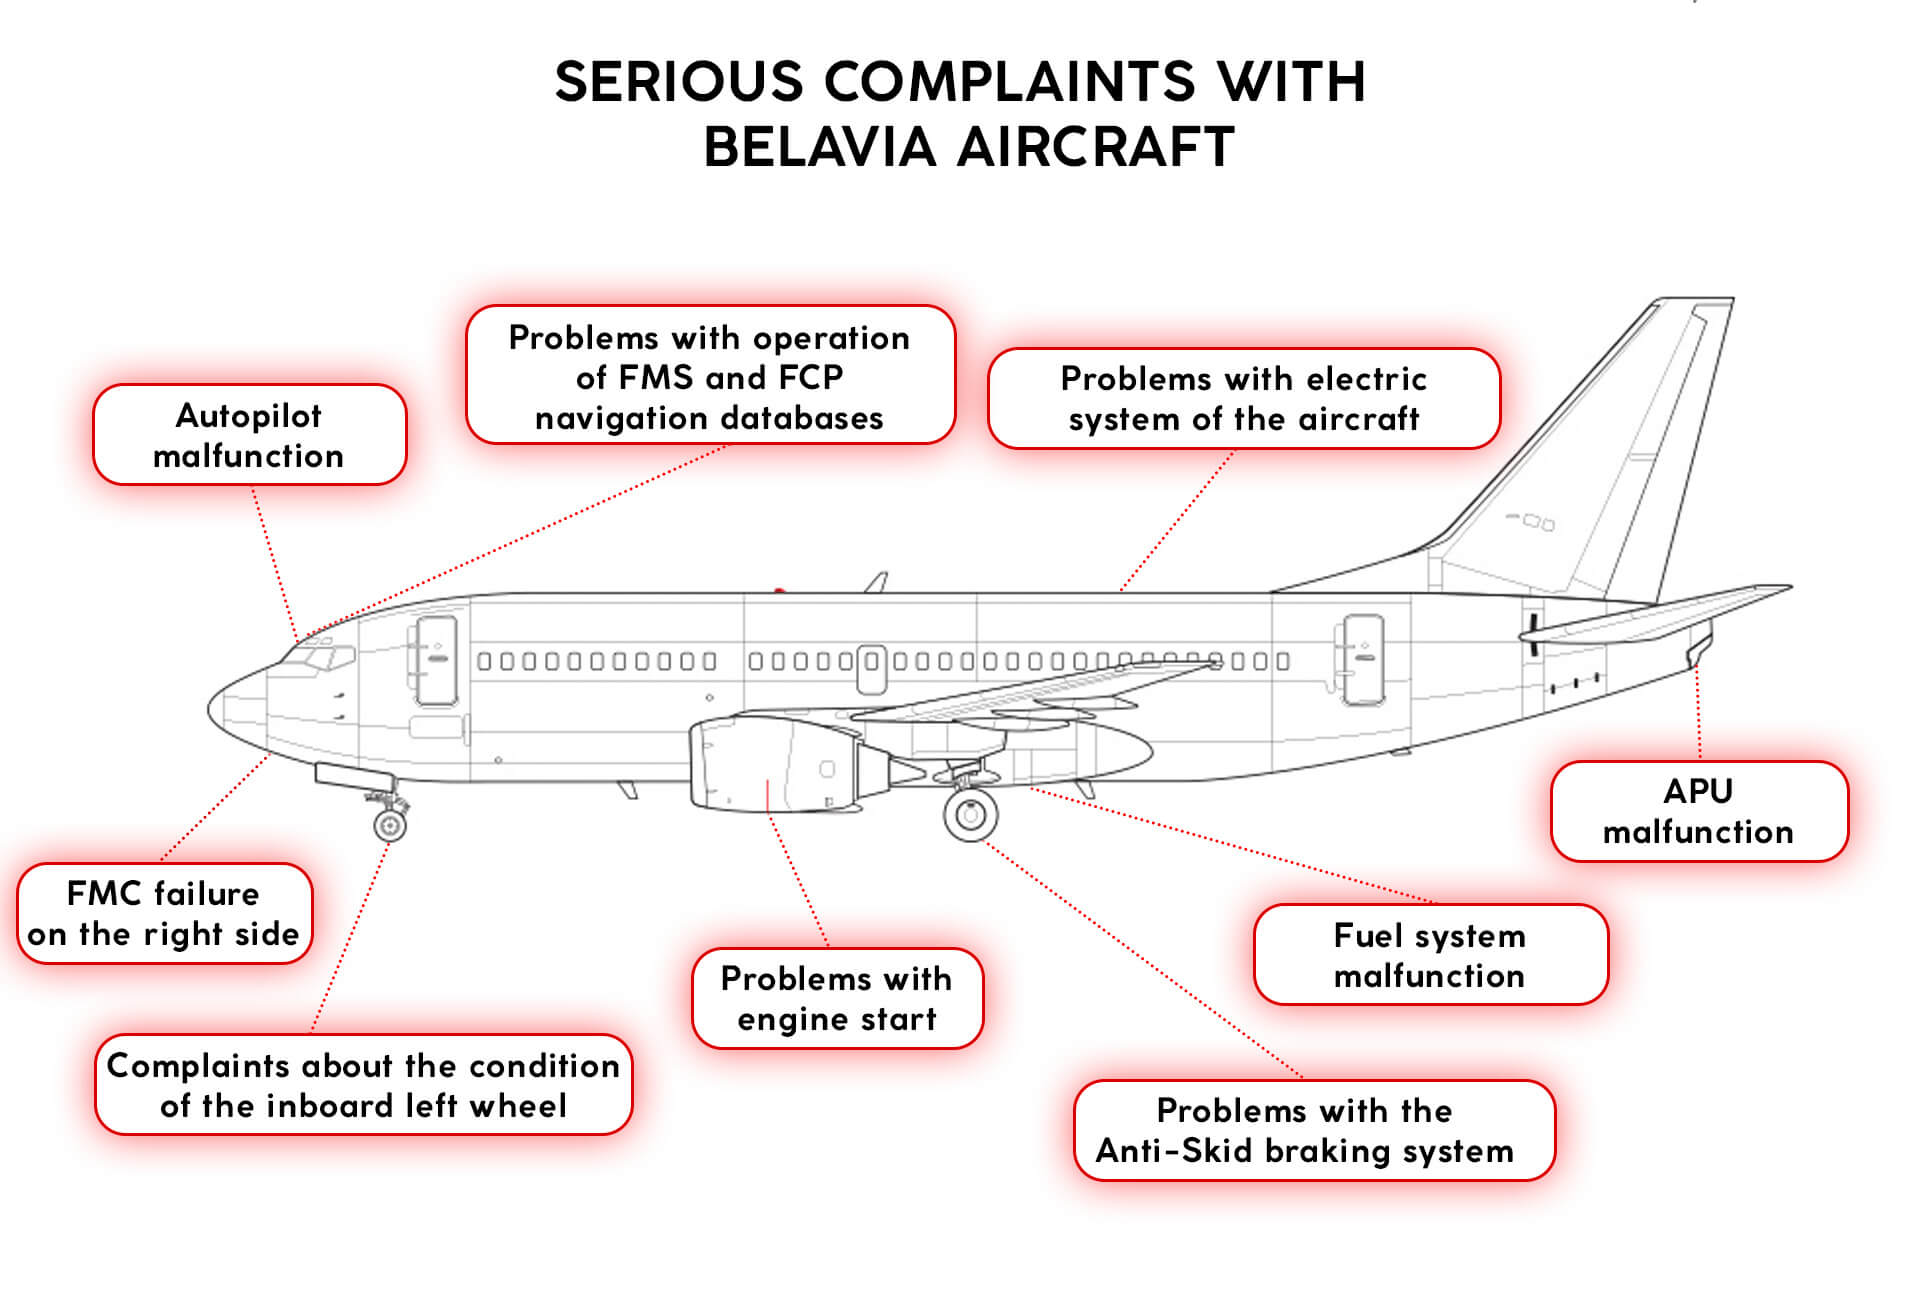 Brakes are failing, autopilot is not working: Pilots told what’s wrong with Belavia aircraft